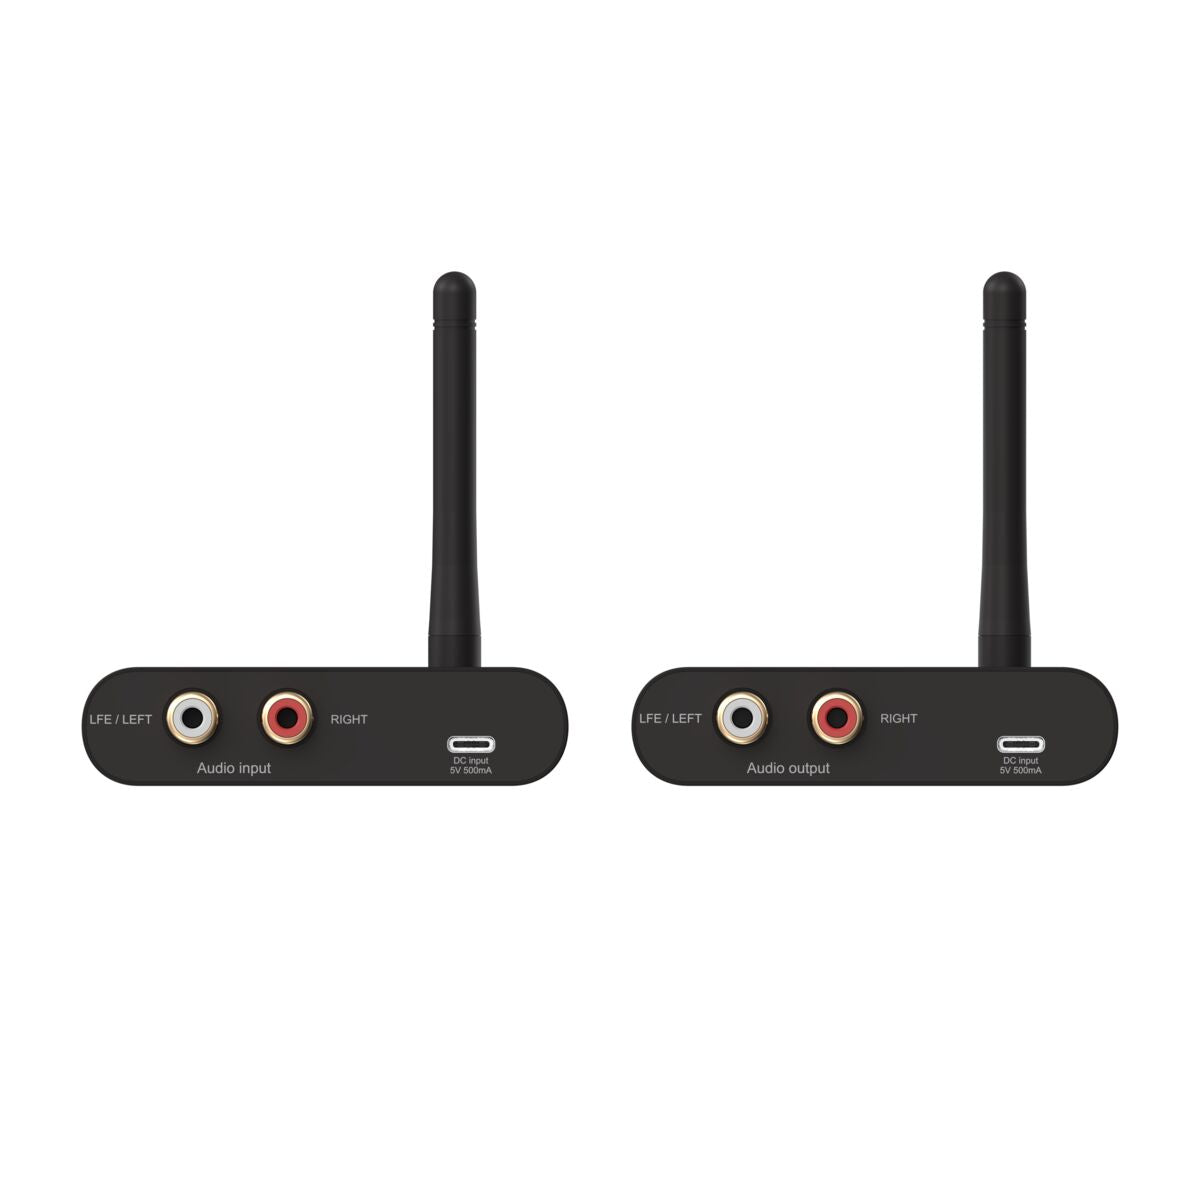 Buying a Subwoofer Anywhere 640 audio transmitter?